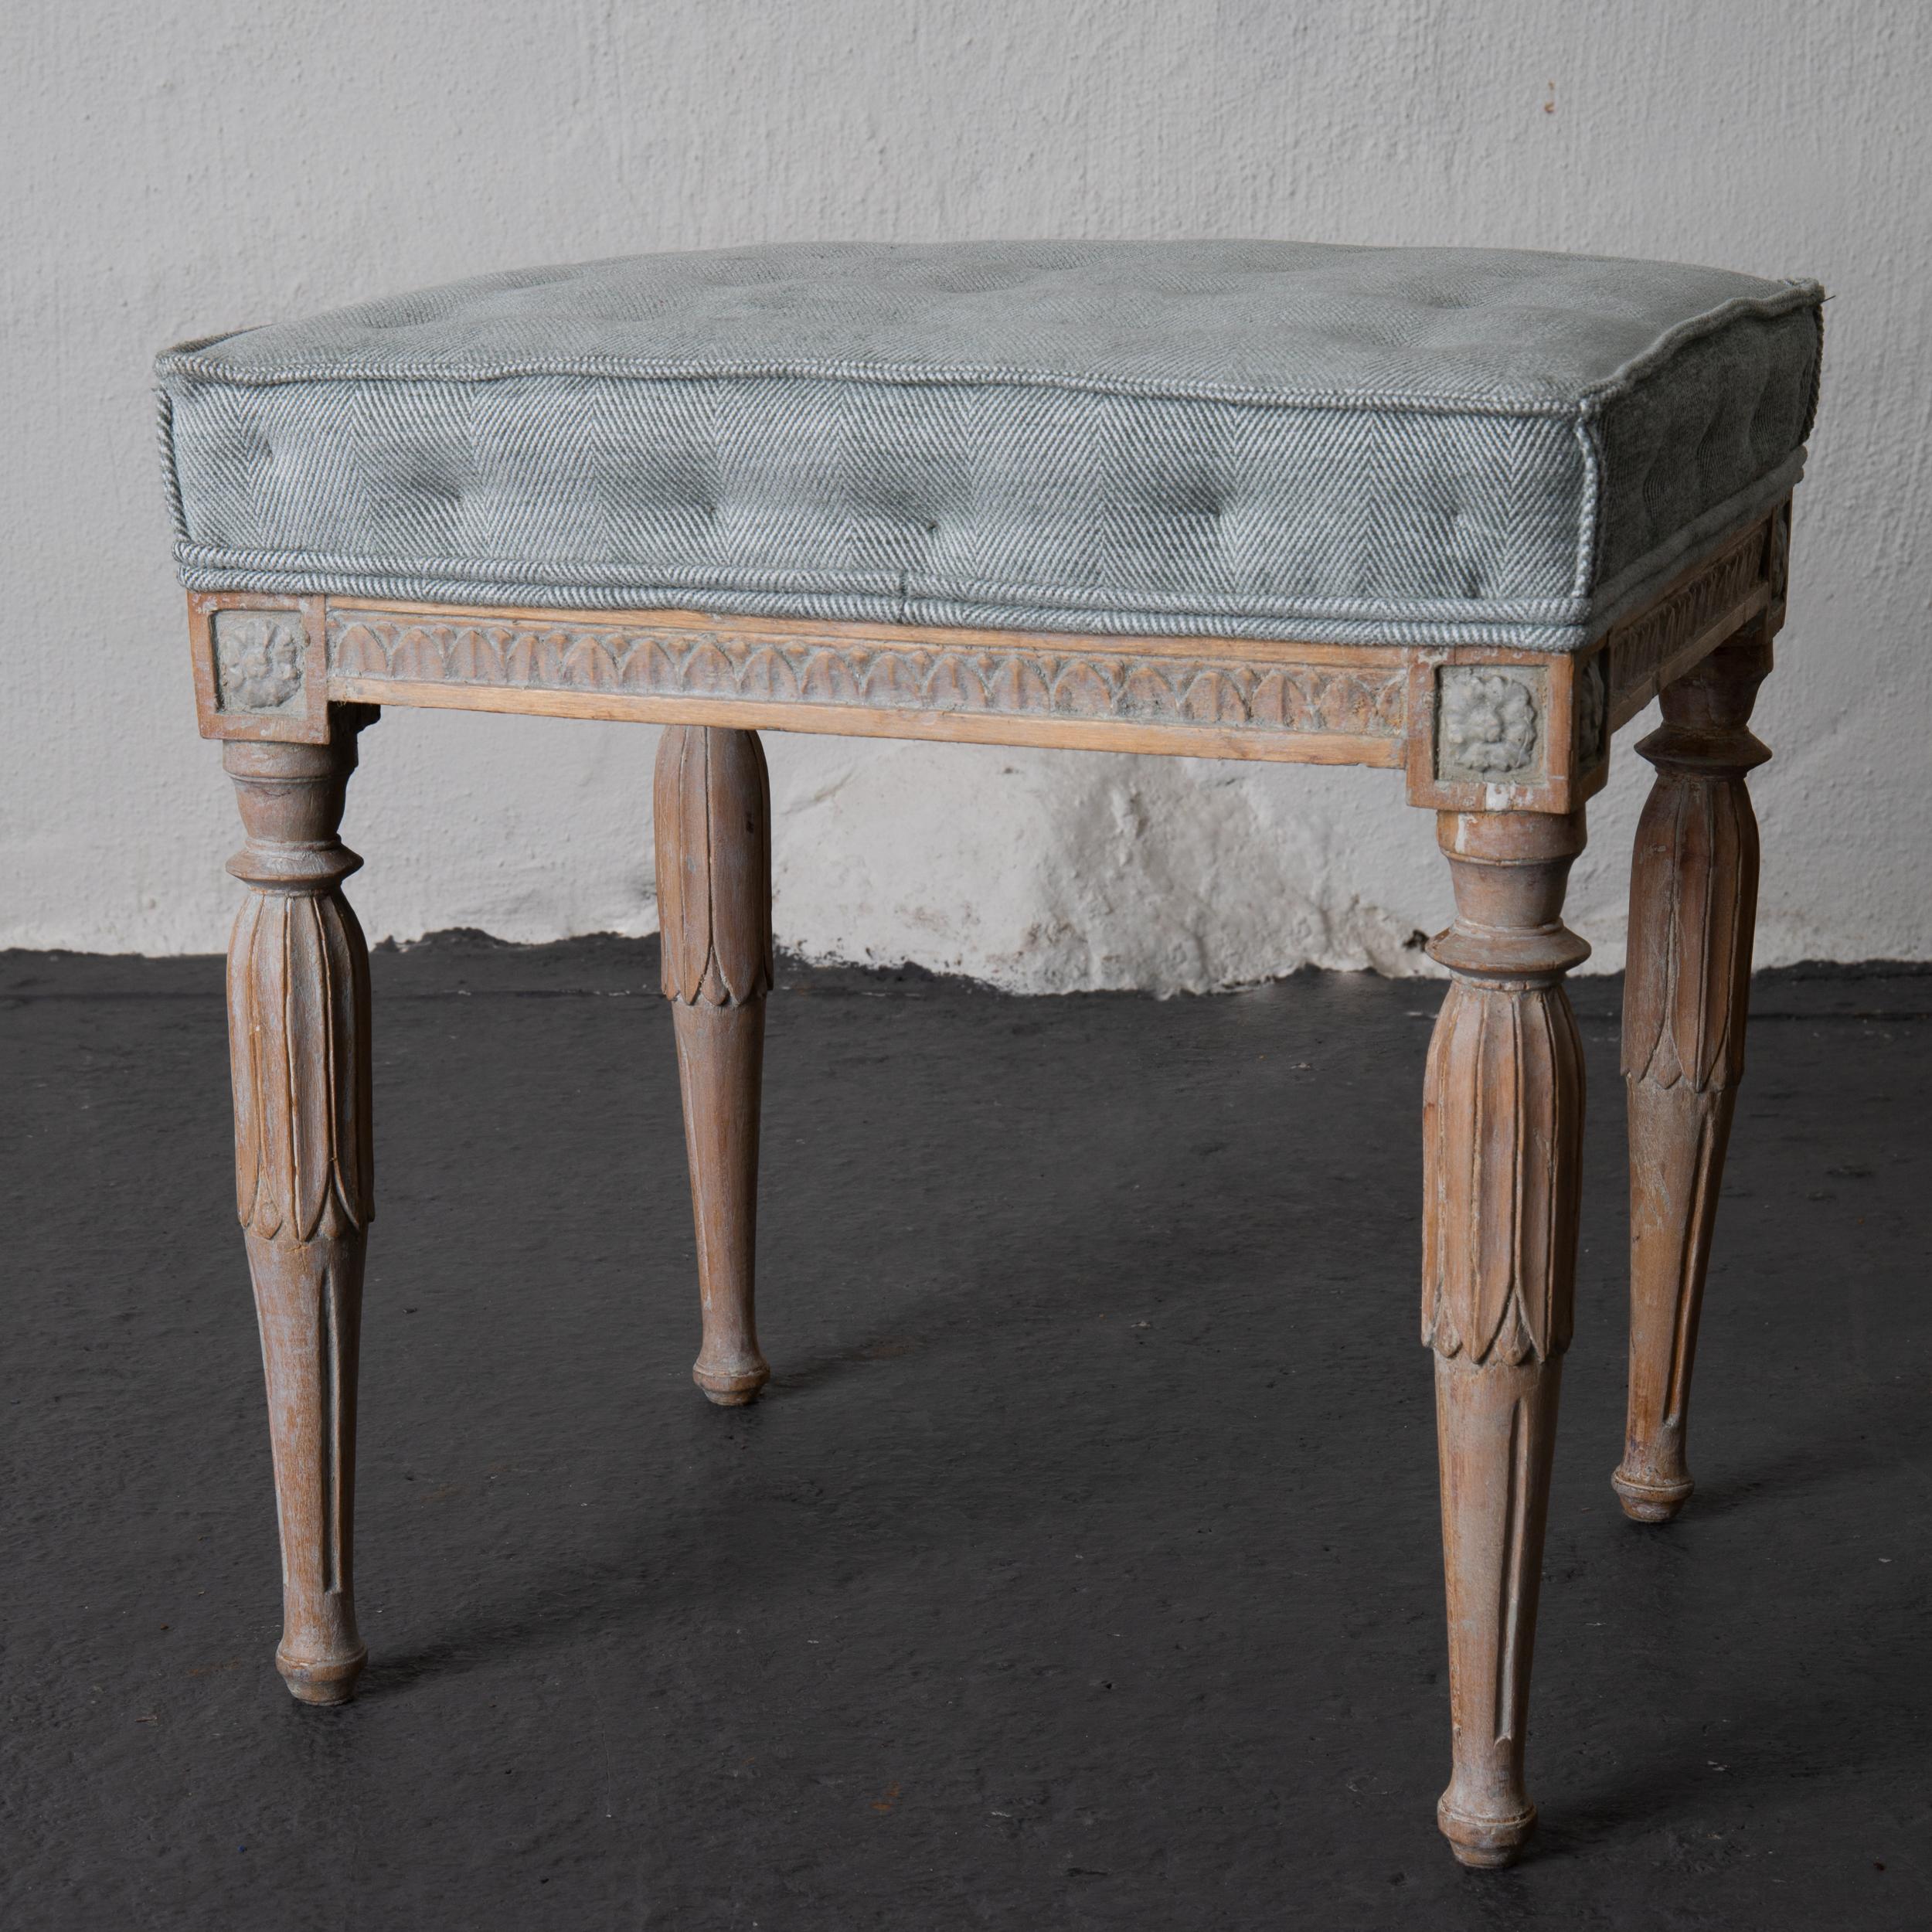 Stools assembled pair of Swedish Gustavian neoclassical wood, Sweden. An assembled pair of stools made during the Gustavian period in Sweden. Leaf tip carvings on frieze and legs. Upholstered in a soft fishbone patterned fabric in green and white.